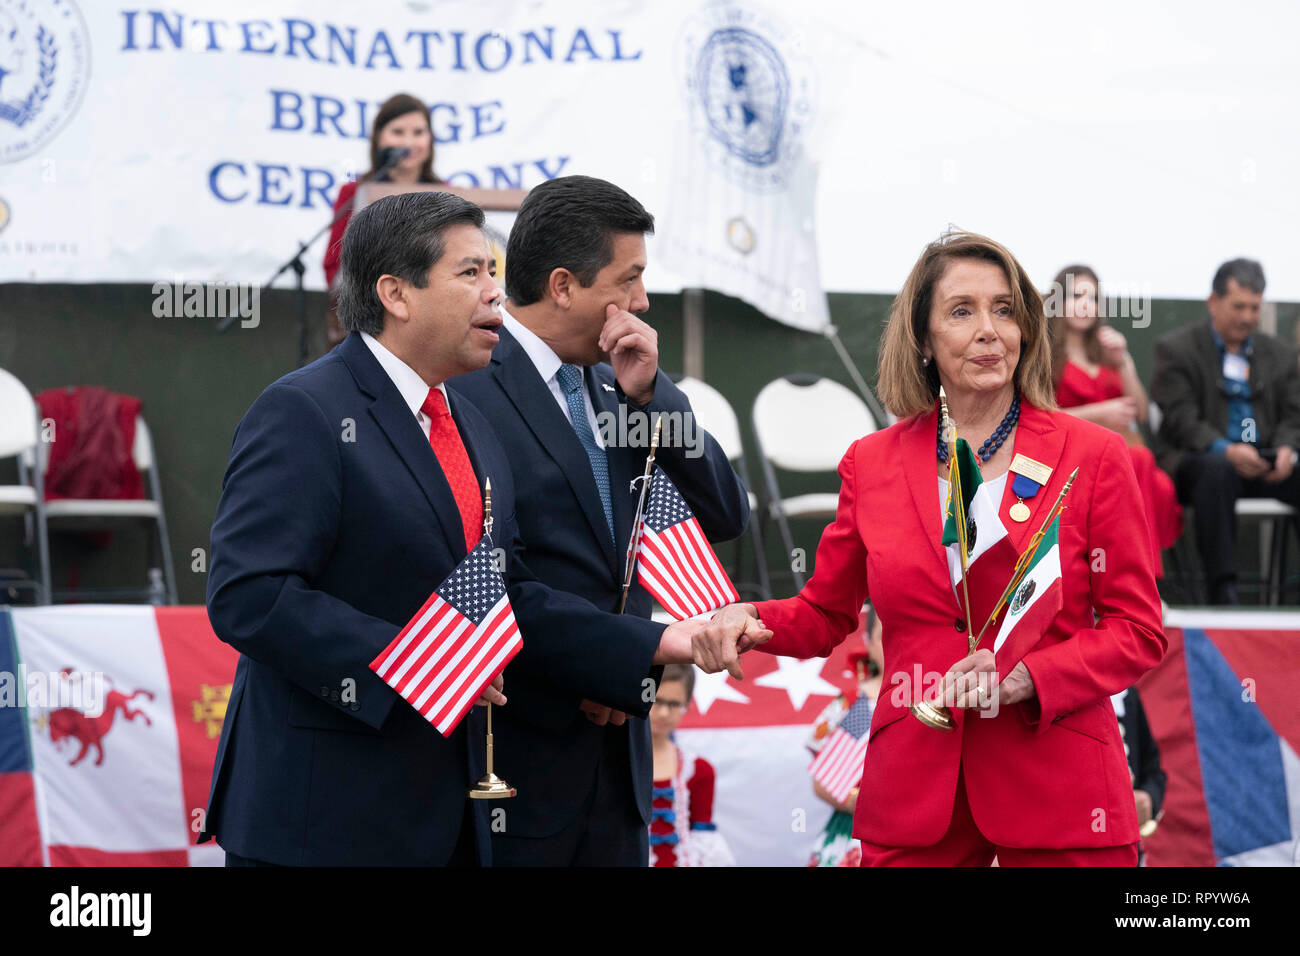 United States House of Representatives Speaker Nancy Pelosi, with National Institute of Migration commissioner Dr. Tonatiuh Guillen Lopez (red tie) and Francisco Javier Garcia Cabeza de Vaca (blue tie), governor of the Mexican state of Tamaulipas, participate in the abrazo (friendship) ceremony on the Juarez Lincoln international bridge between Laredo, Texas, and Nuevo Laredo in Tamaulipas during Laredo's annual Washington's Birthday celebration. Stock Photo